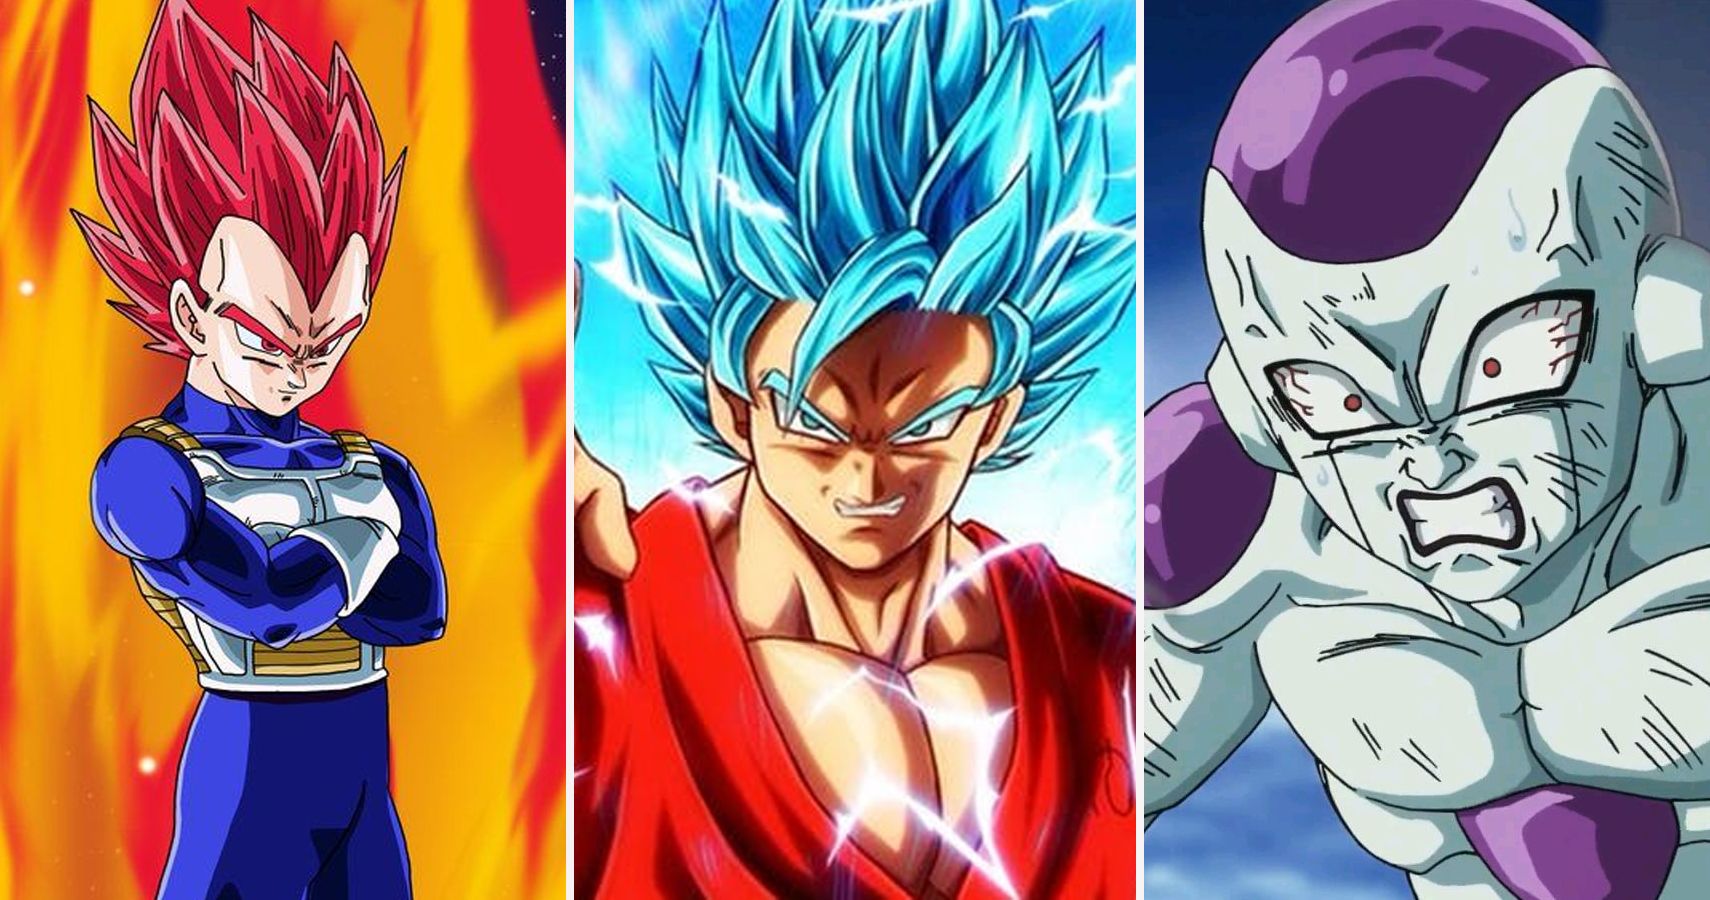 Dragon Ball Z 25 Facts About Resurrection F Only True Fans Know